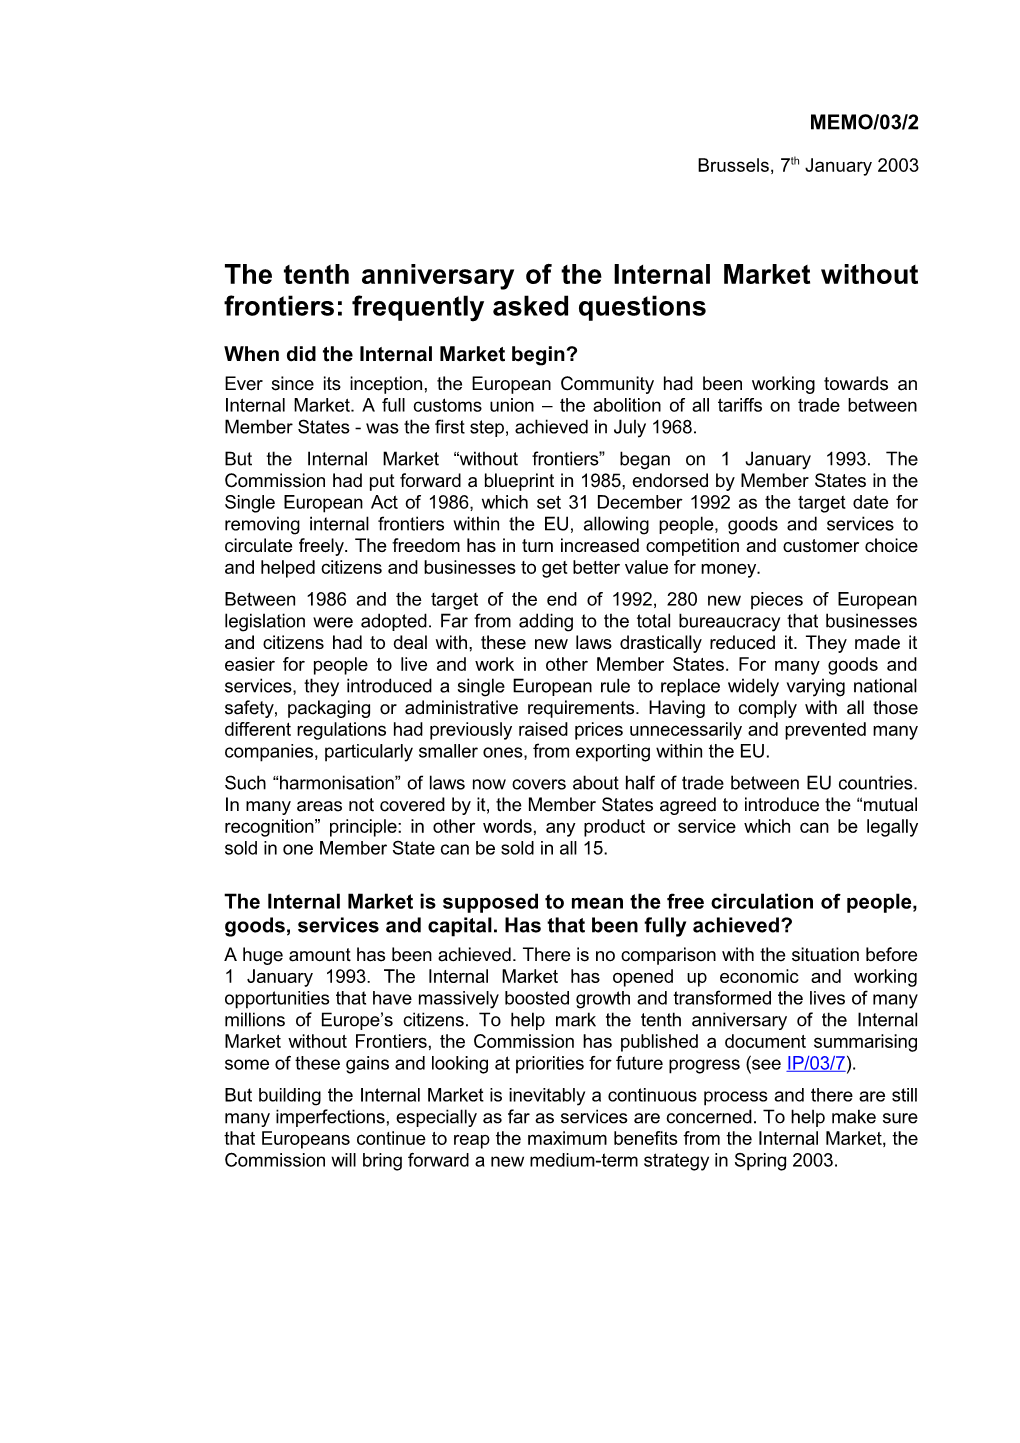 The Tenth Anniversary of the Internal Market Without Frontiers: Frequently Asked Questions